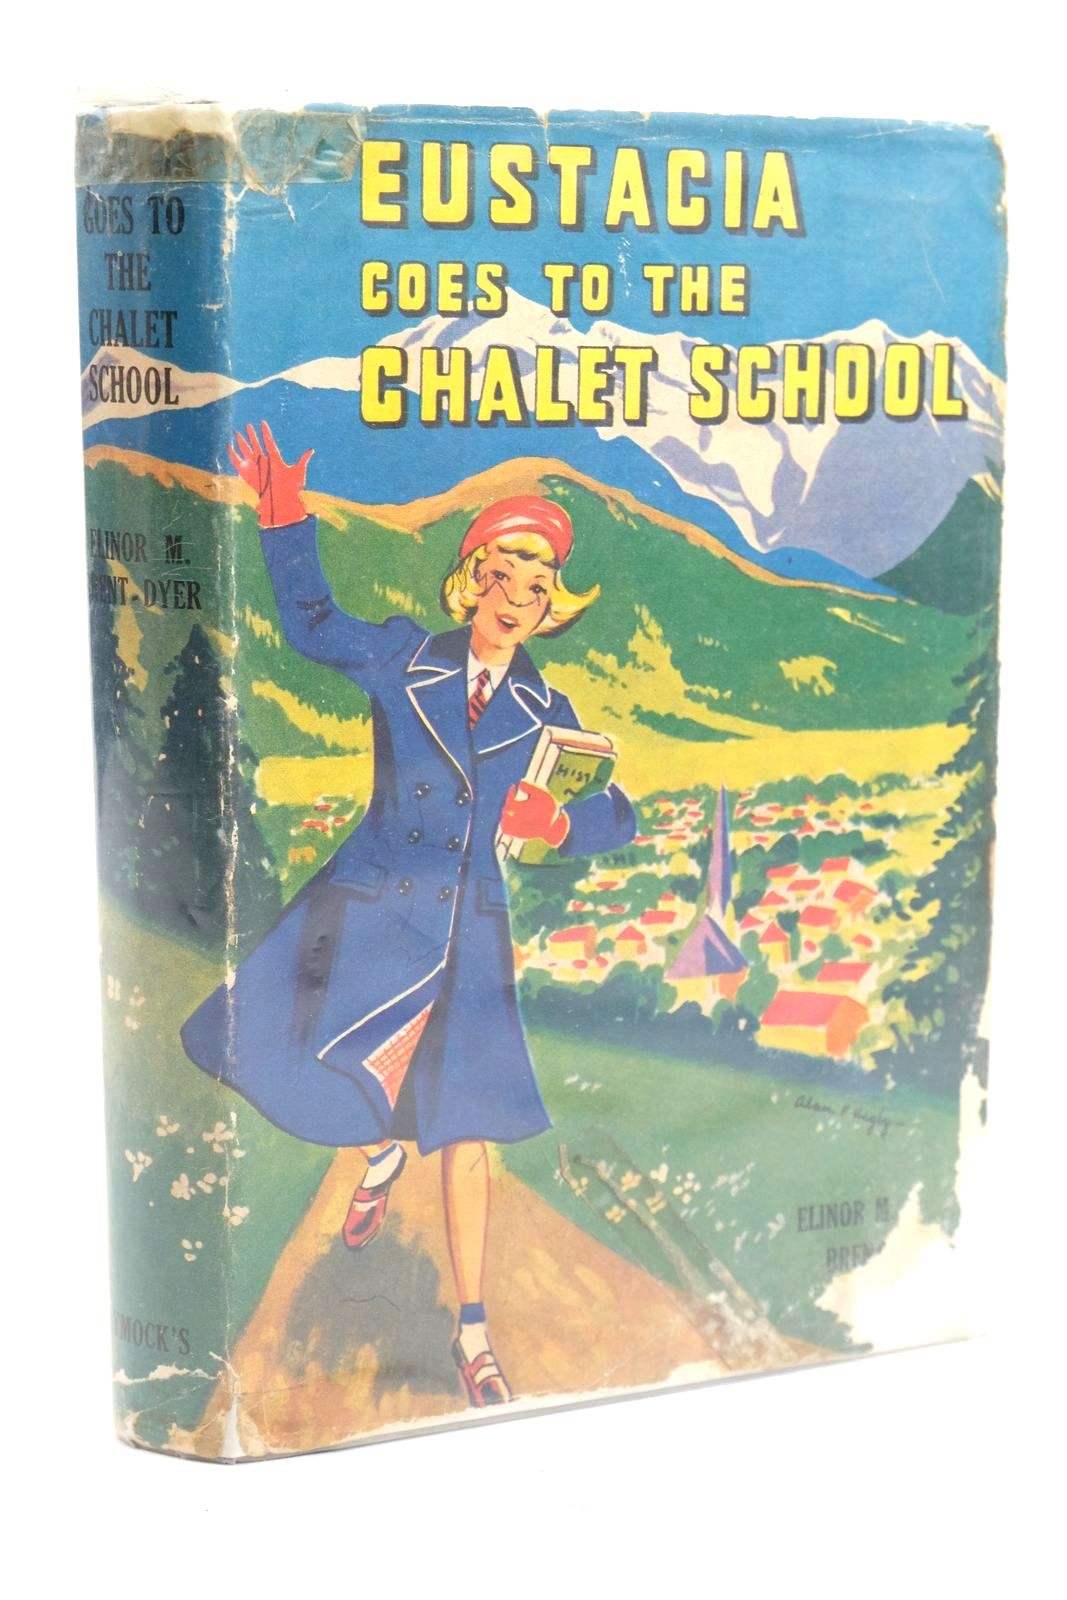 Photo of EUSTACIA GOES TO THE CHALET SCHOOL written by Brent-Dyer, Elinor M. published by Dymock's Book Arcade Ltd. (STOCK CODE: 1320044)  for sale by Stella & Rose's Books